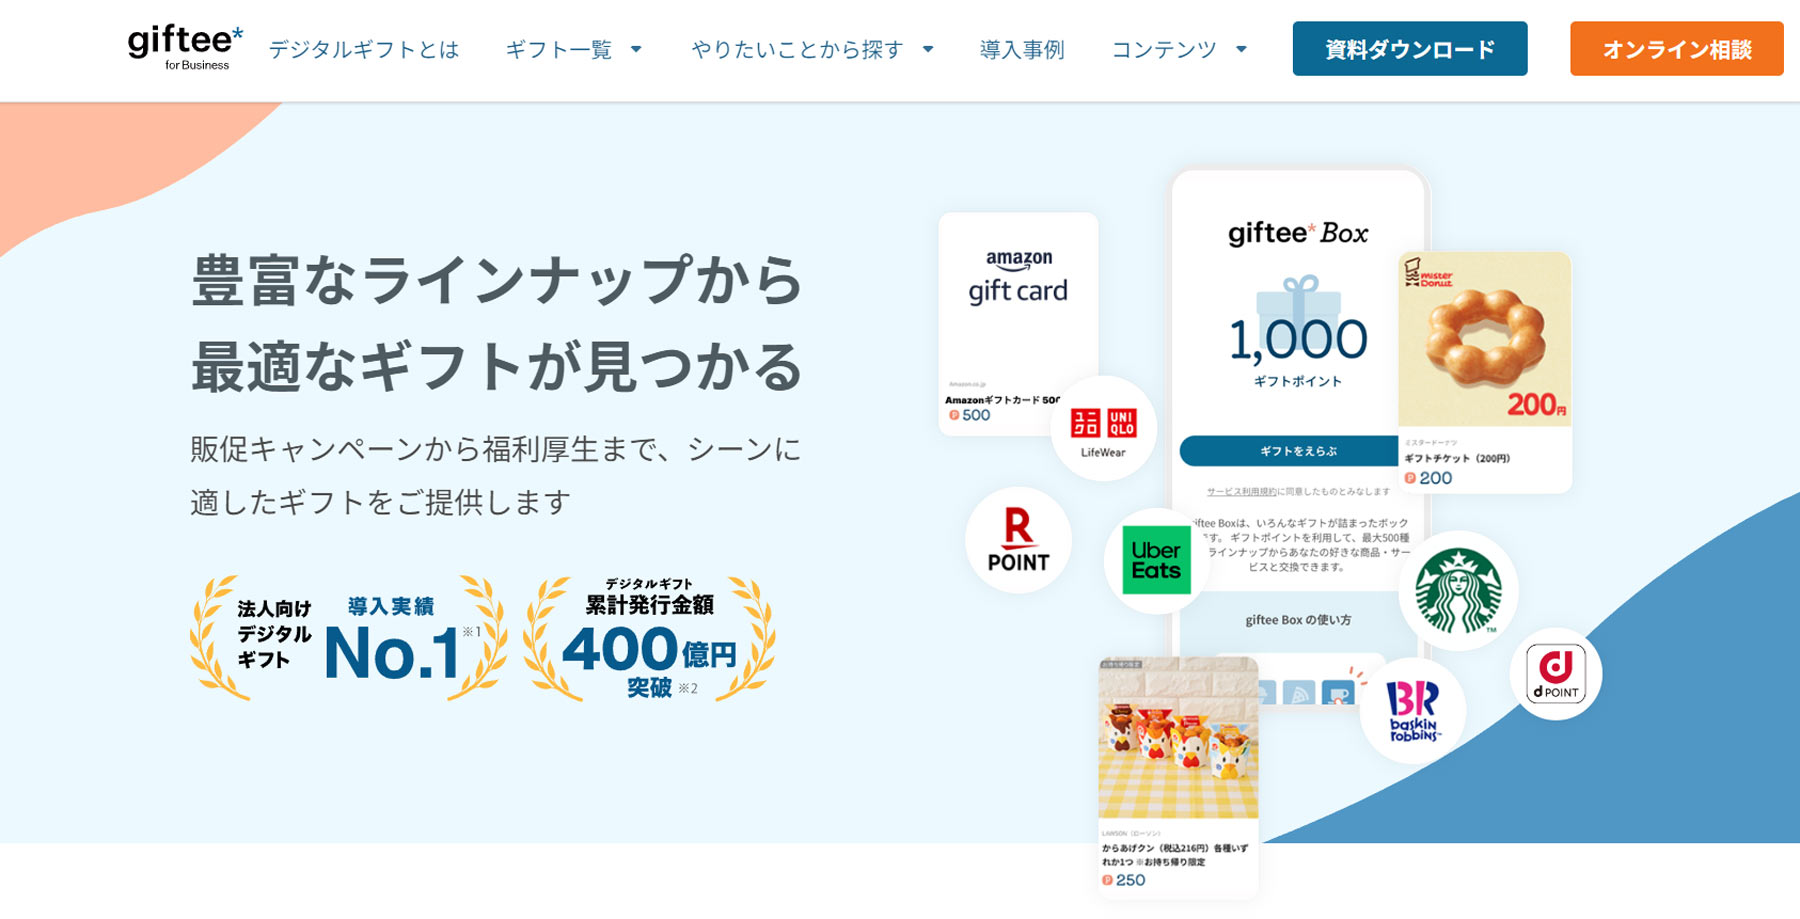 giftee for Business公式Webサイト